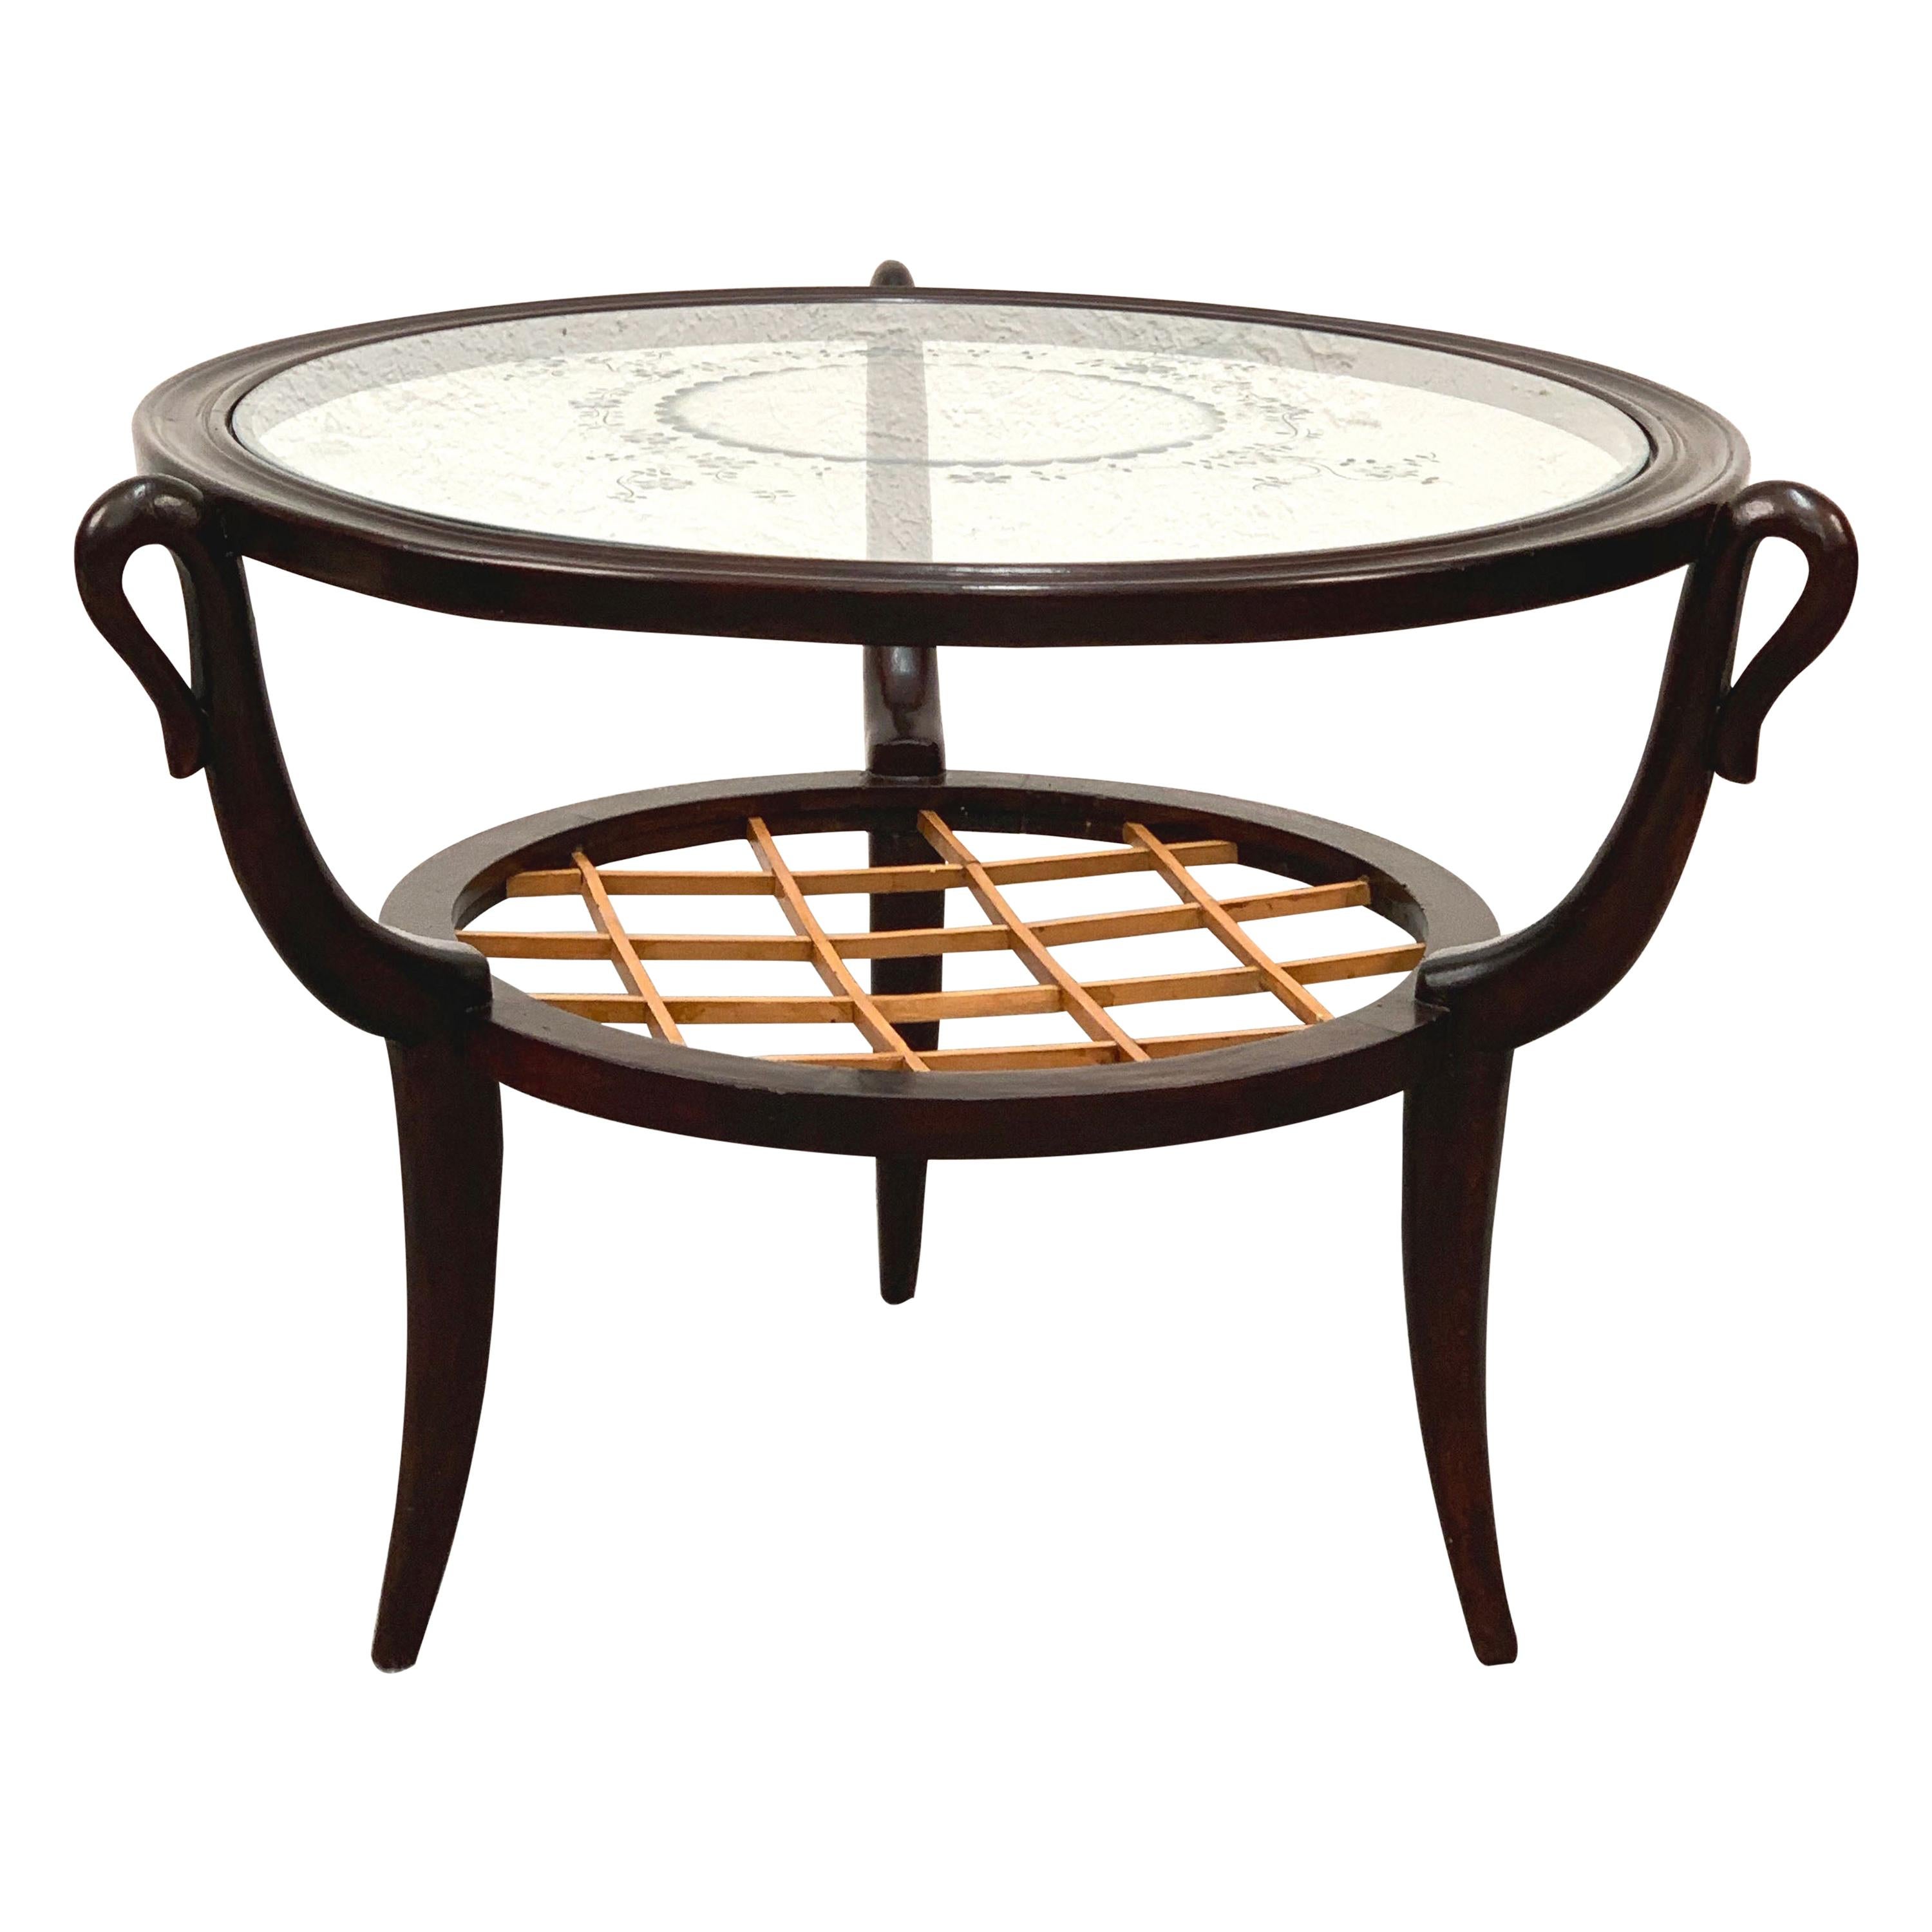 Two-level Round Wood and Glass Italian Coffee Table Gio Ponti Style, 1950s